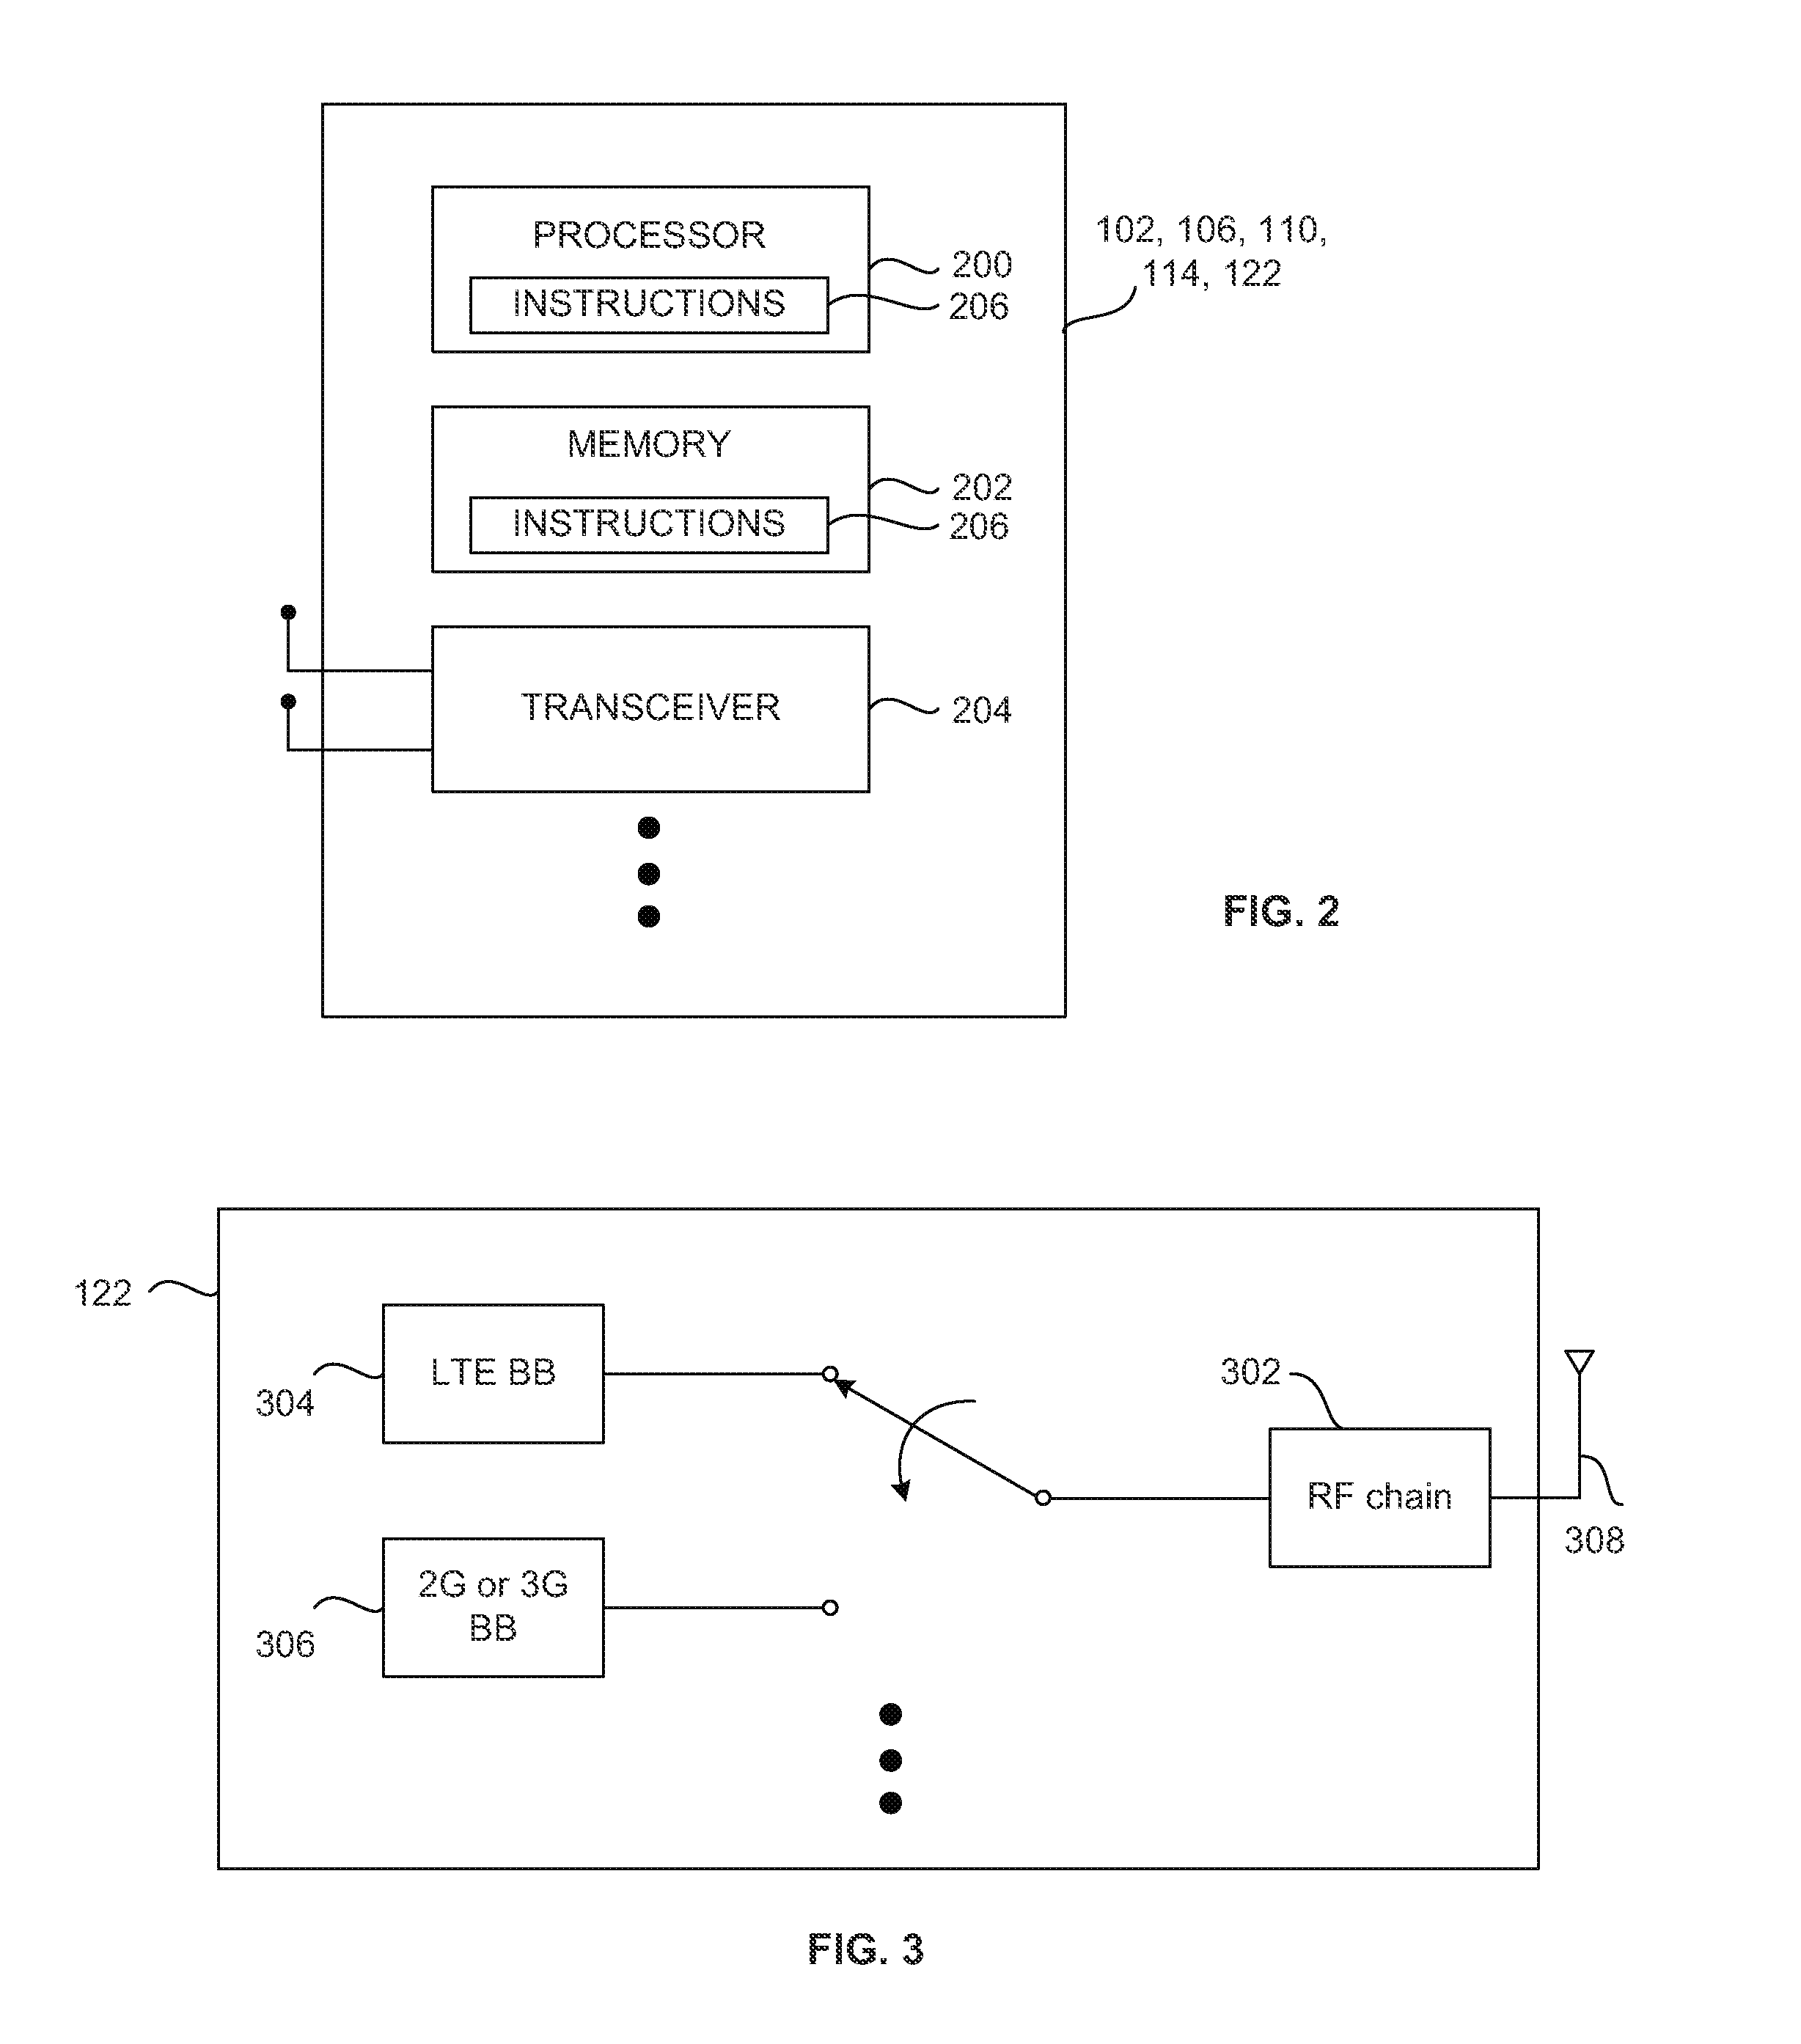 RF chain usage in a dual network architecture